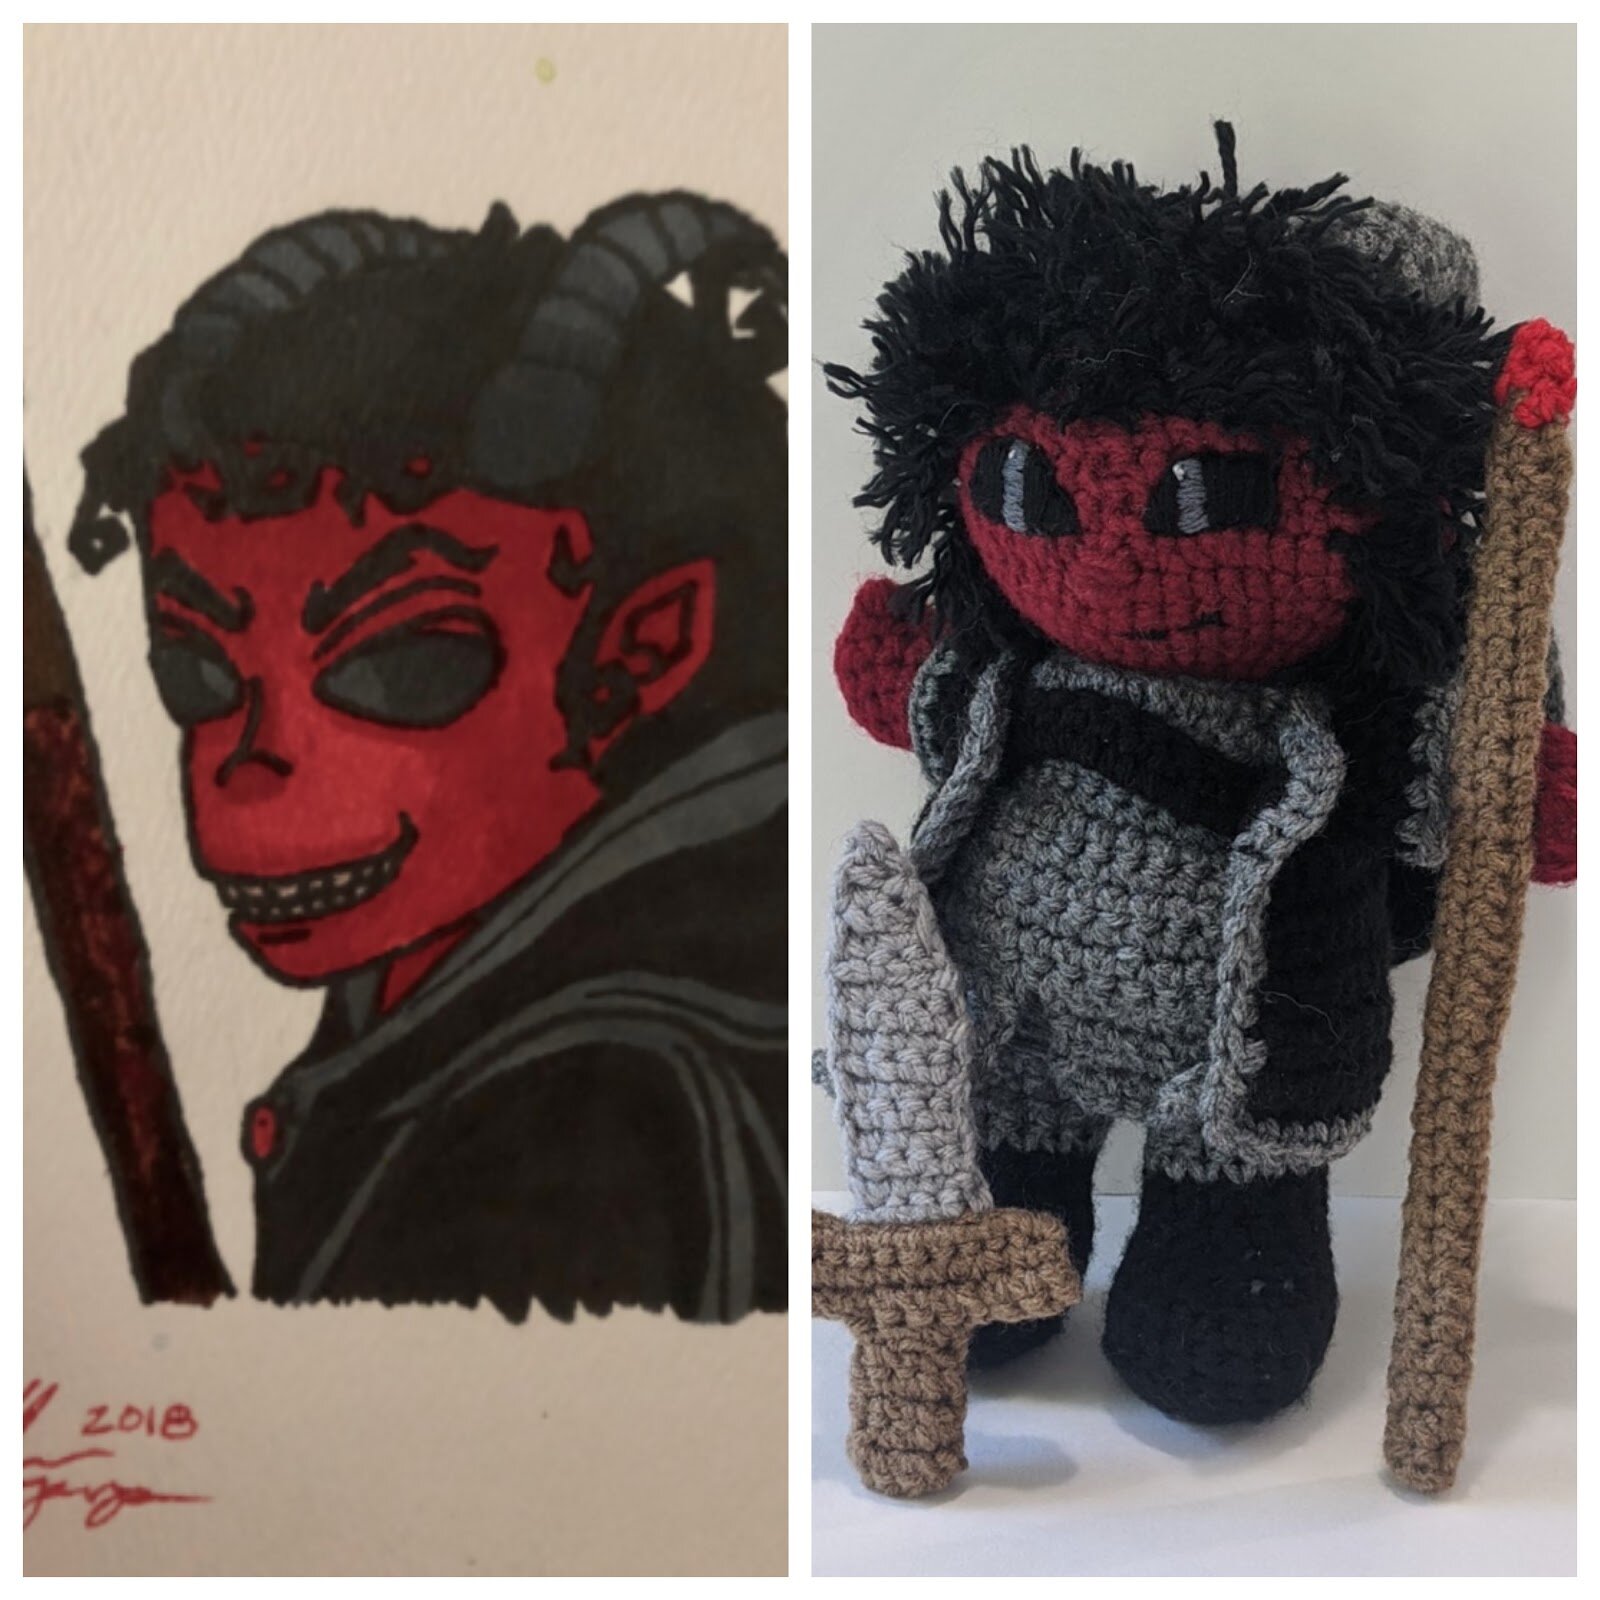 Drawing of a red humanoid on the left. Crochet version of the right.